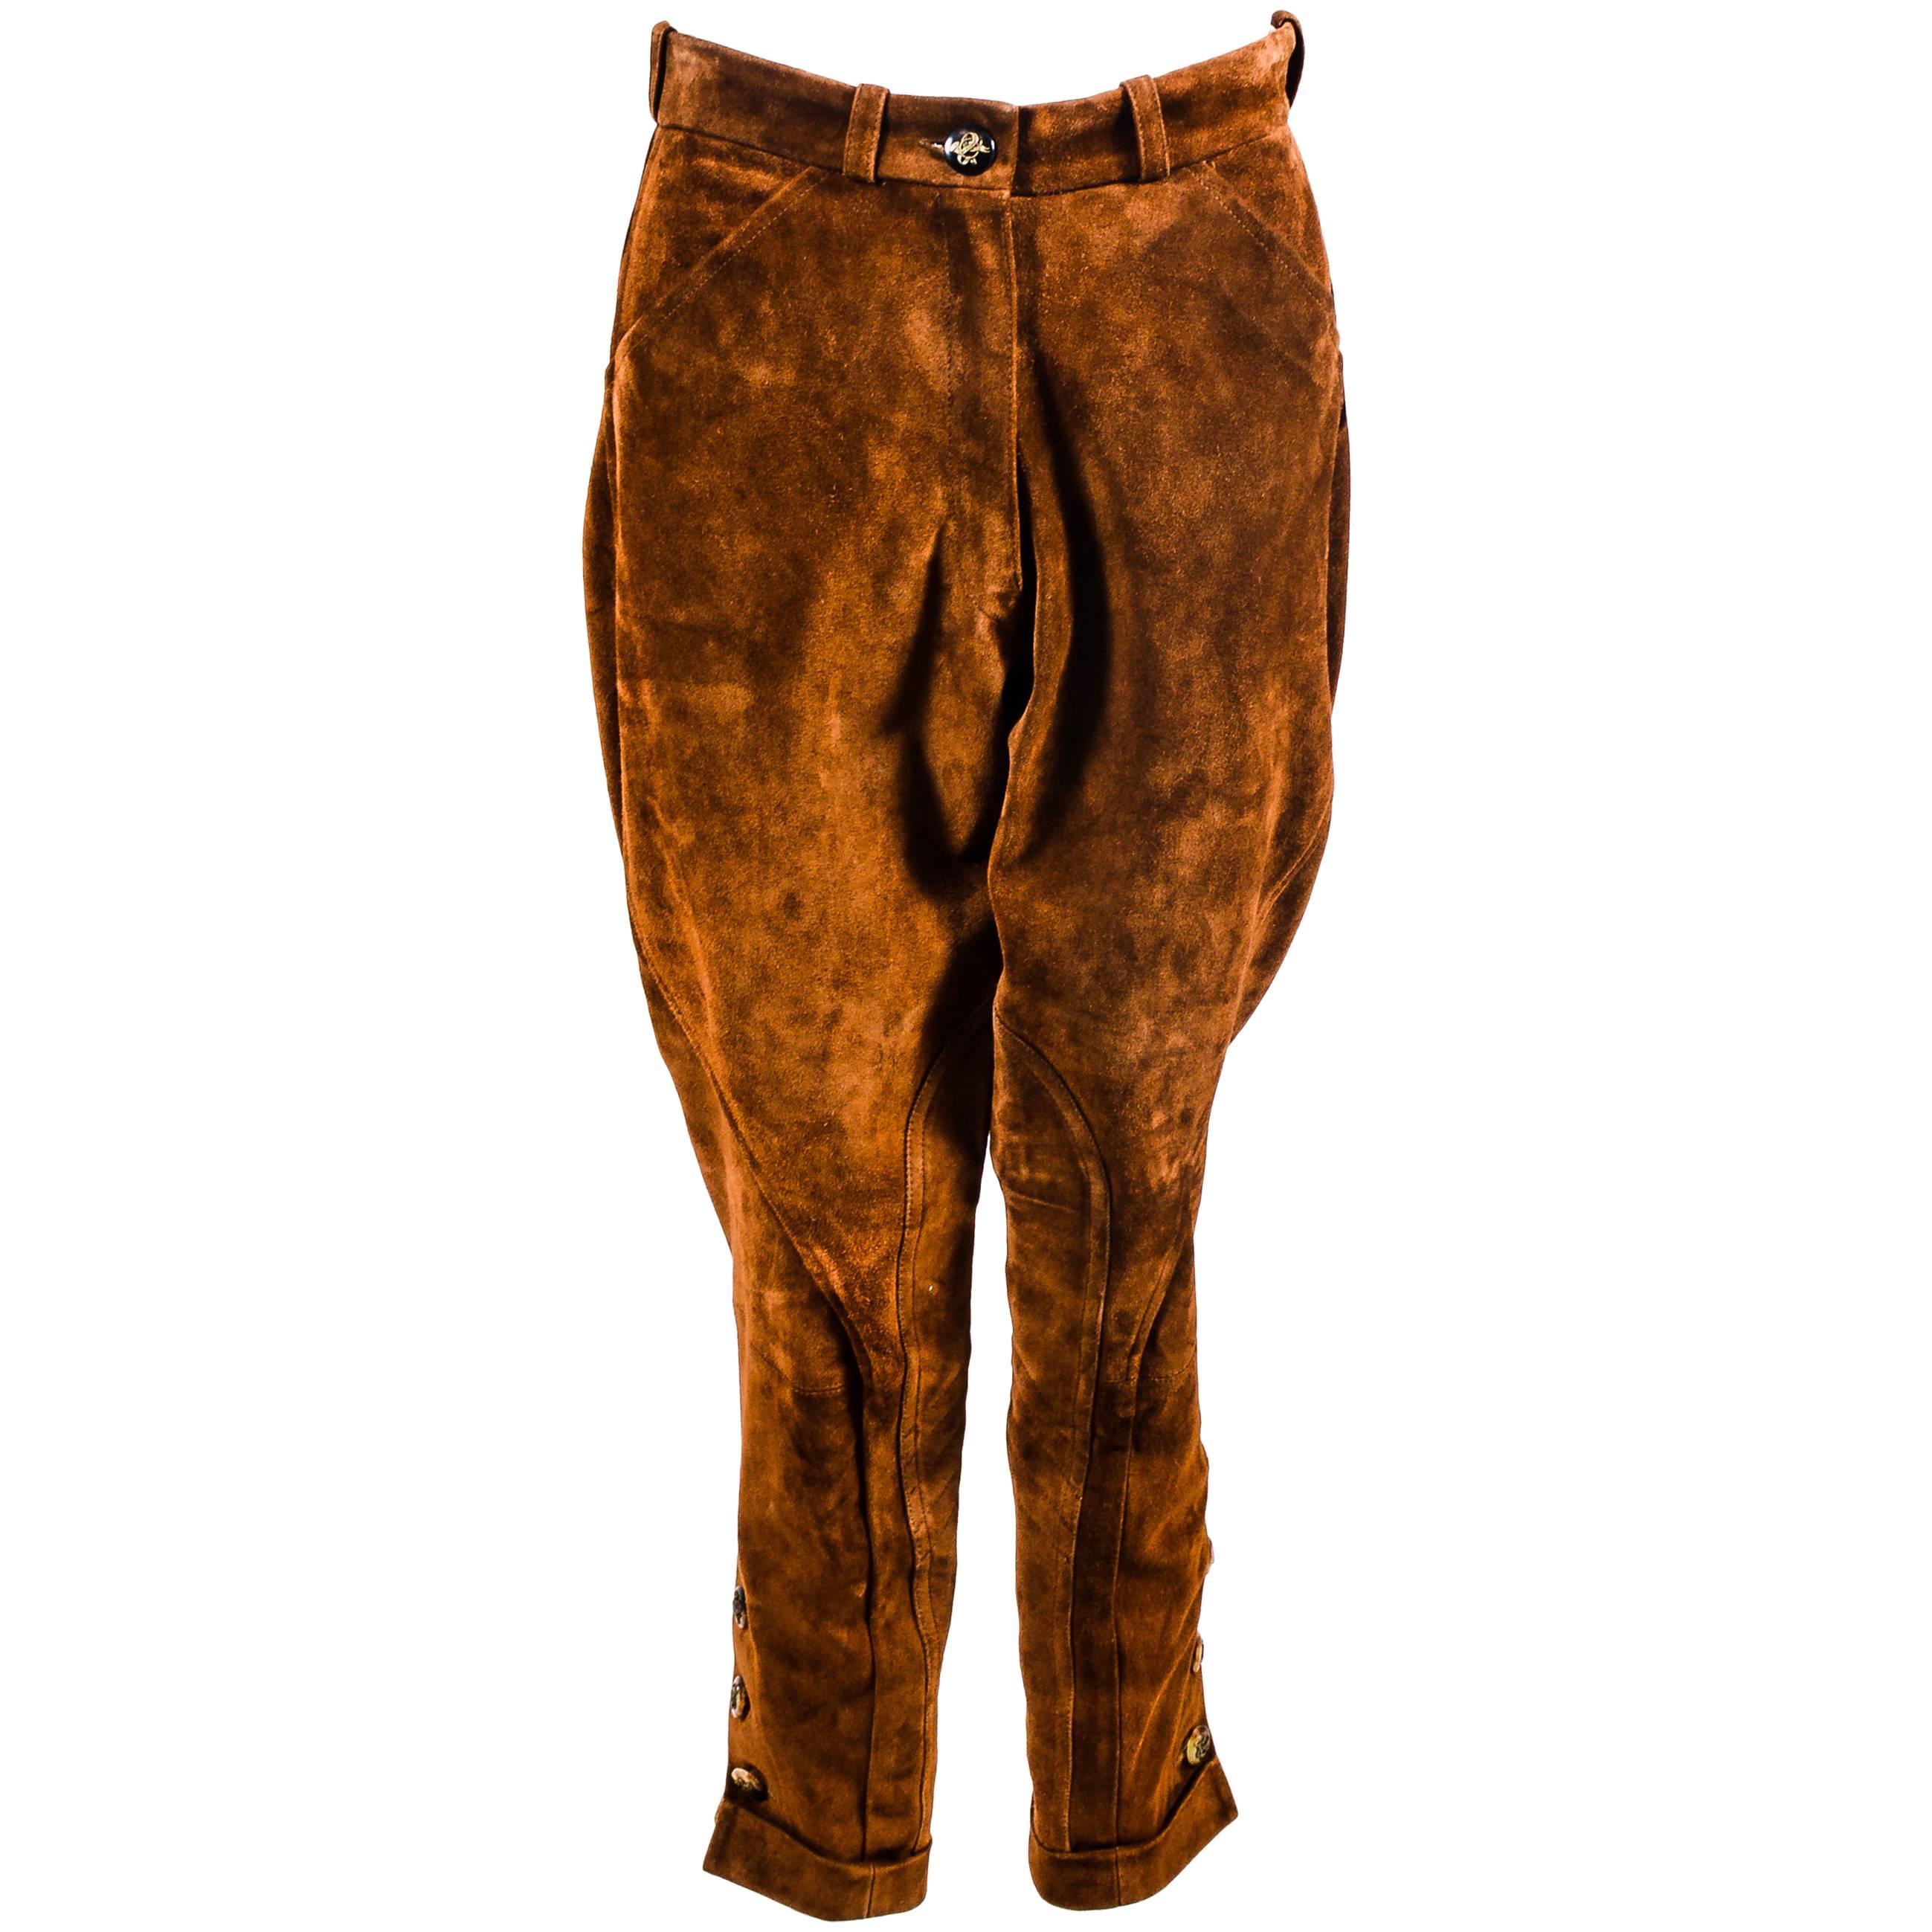 Vintage Hermes NWT Brown Suede Button Leg Cuffed Riding Pants SZ 42 For Sale